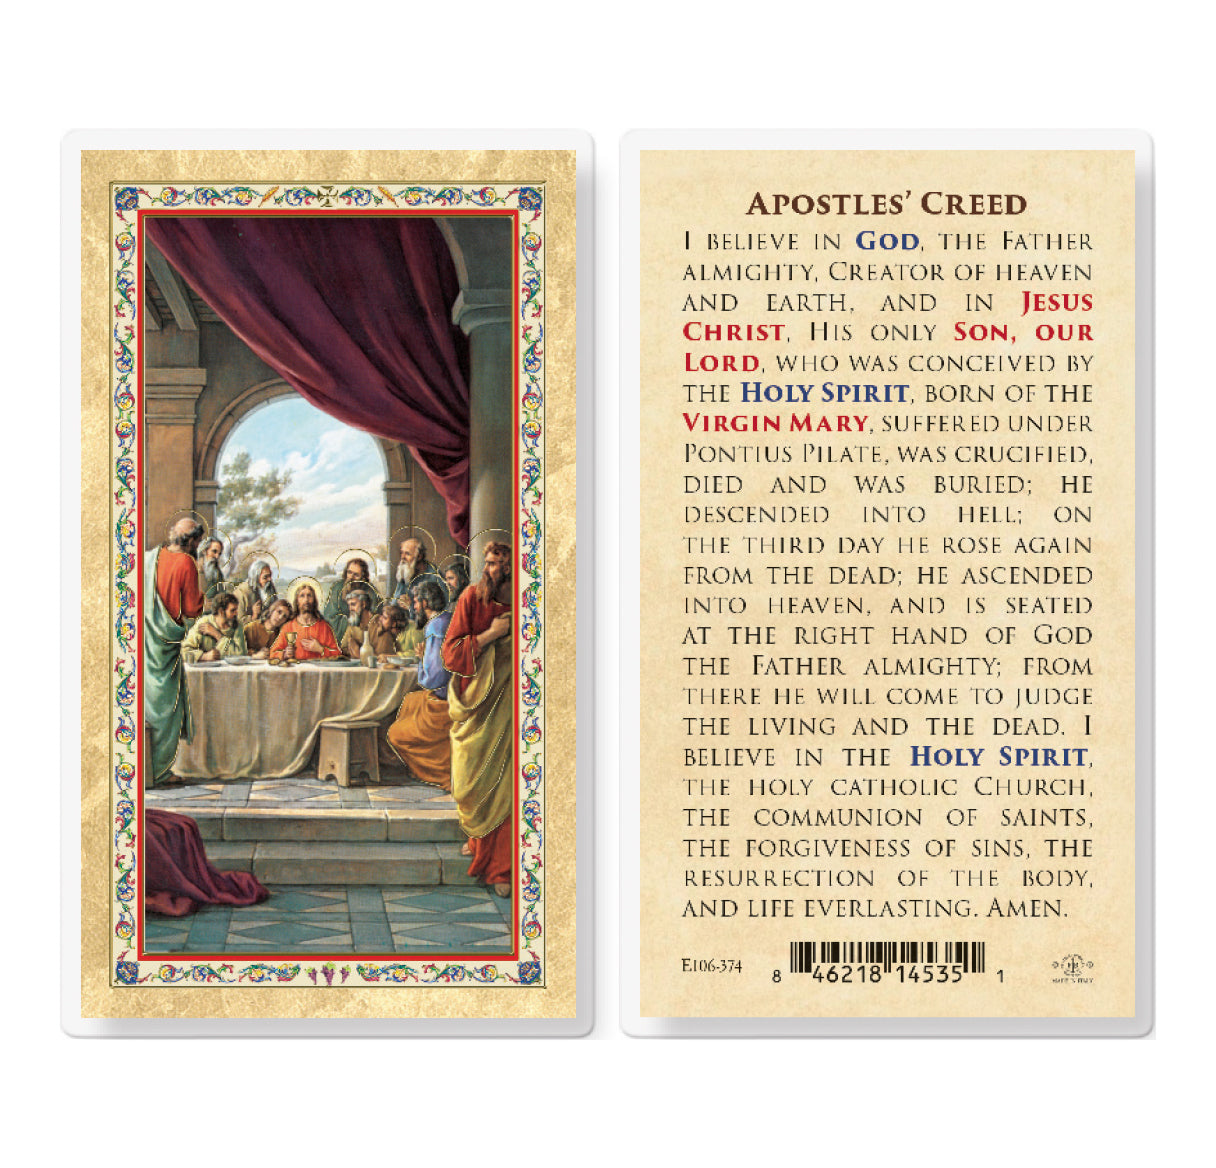 Apostle's Creed - Last Supper Gold-Stamped Laminated Catholic Prayer Holy Card with Prayer on Back, Pack of 25